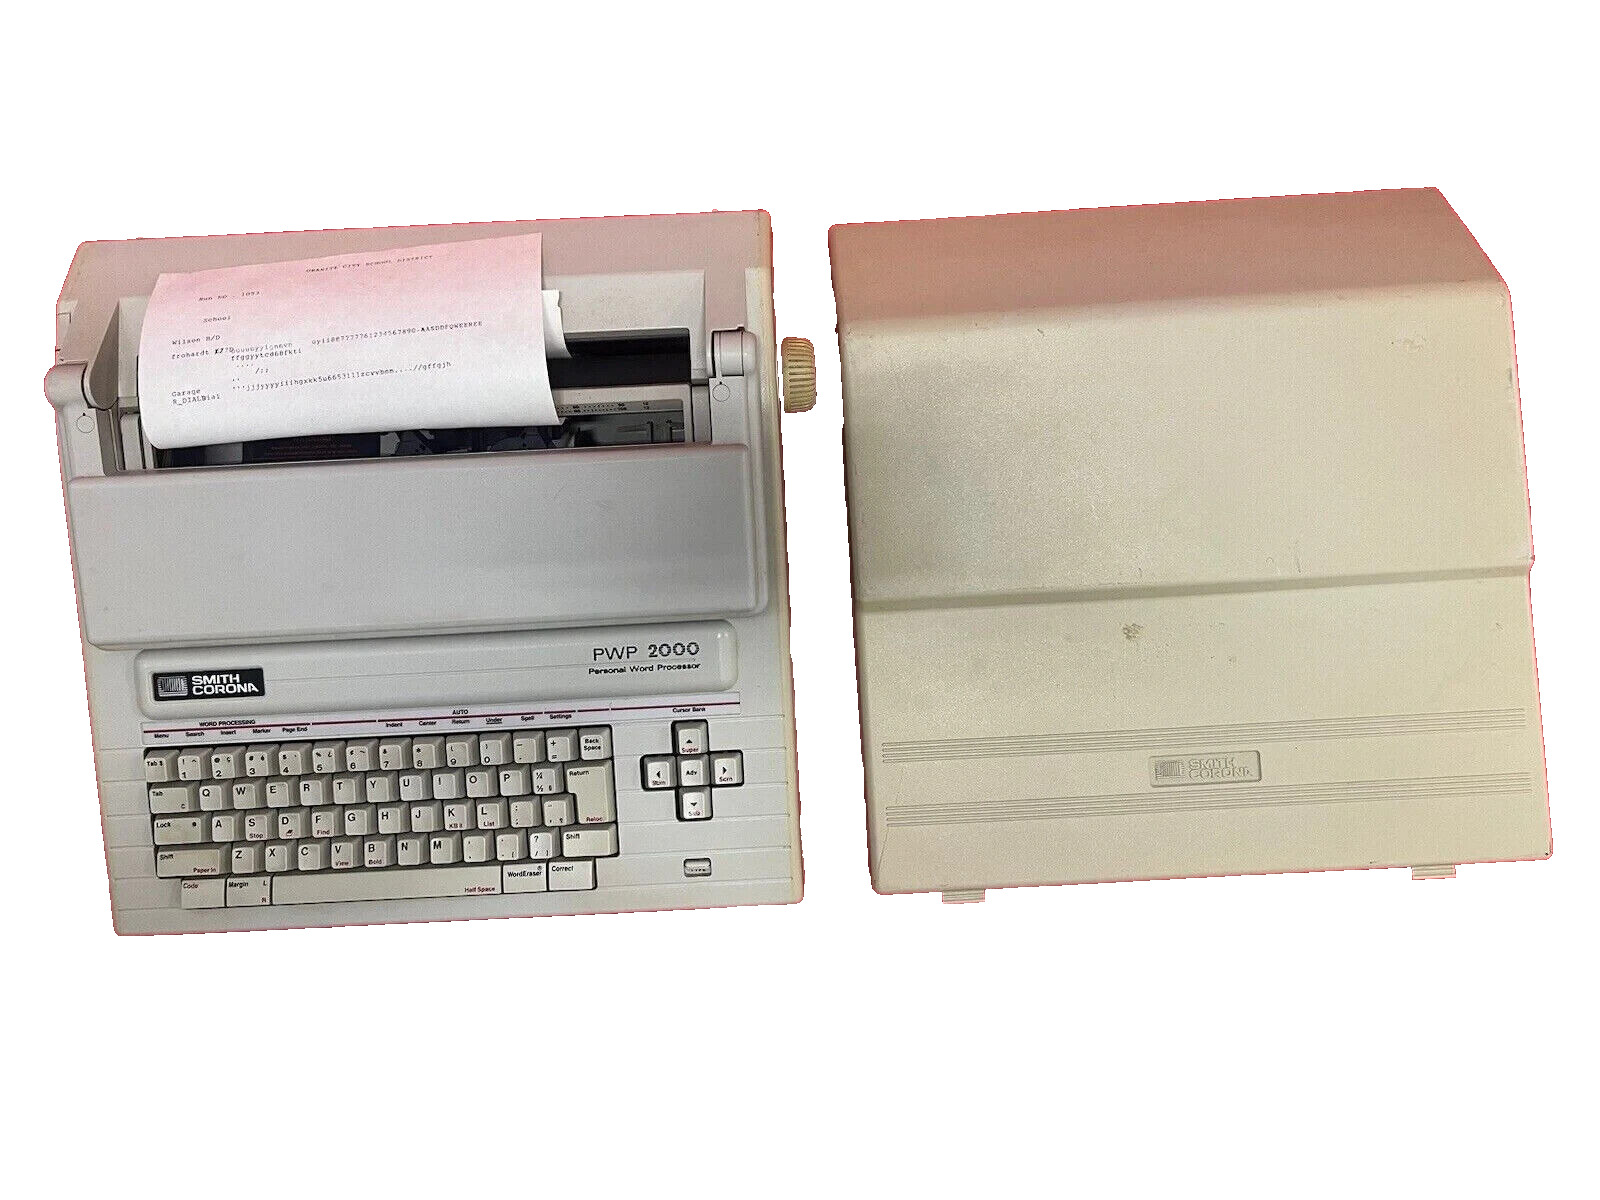 Retro Smith Corona PWP 2000 Personal Word Processor ~ Tested, Works Well